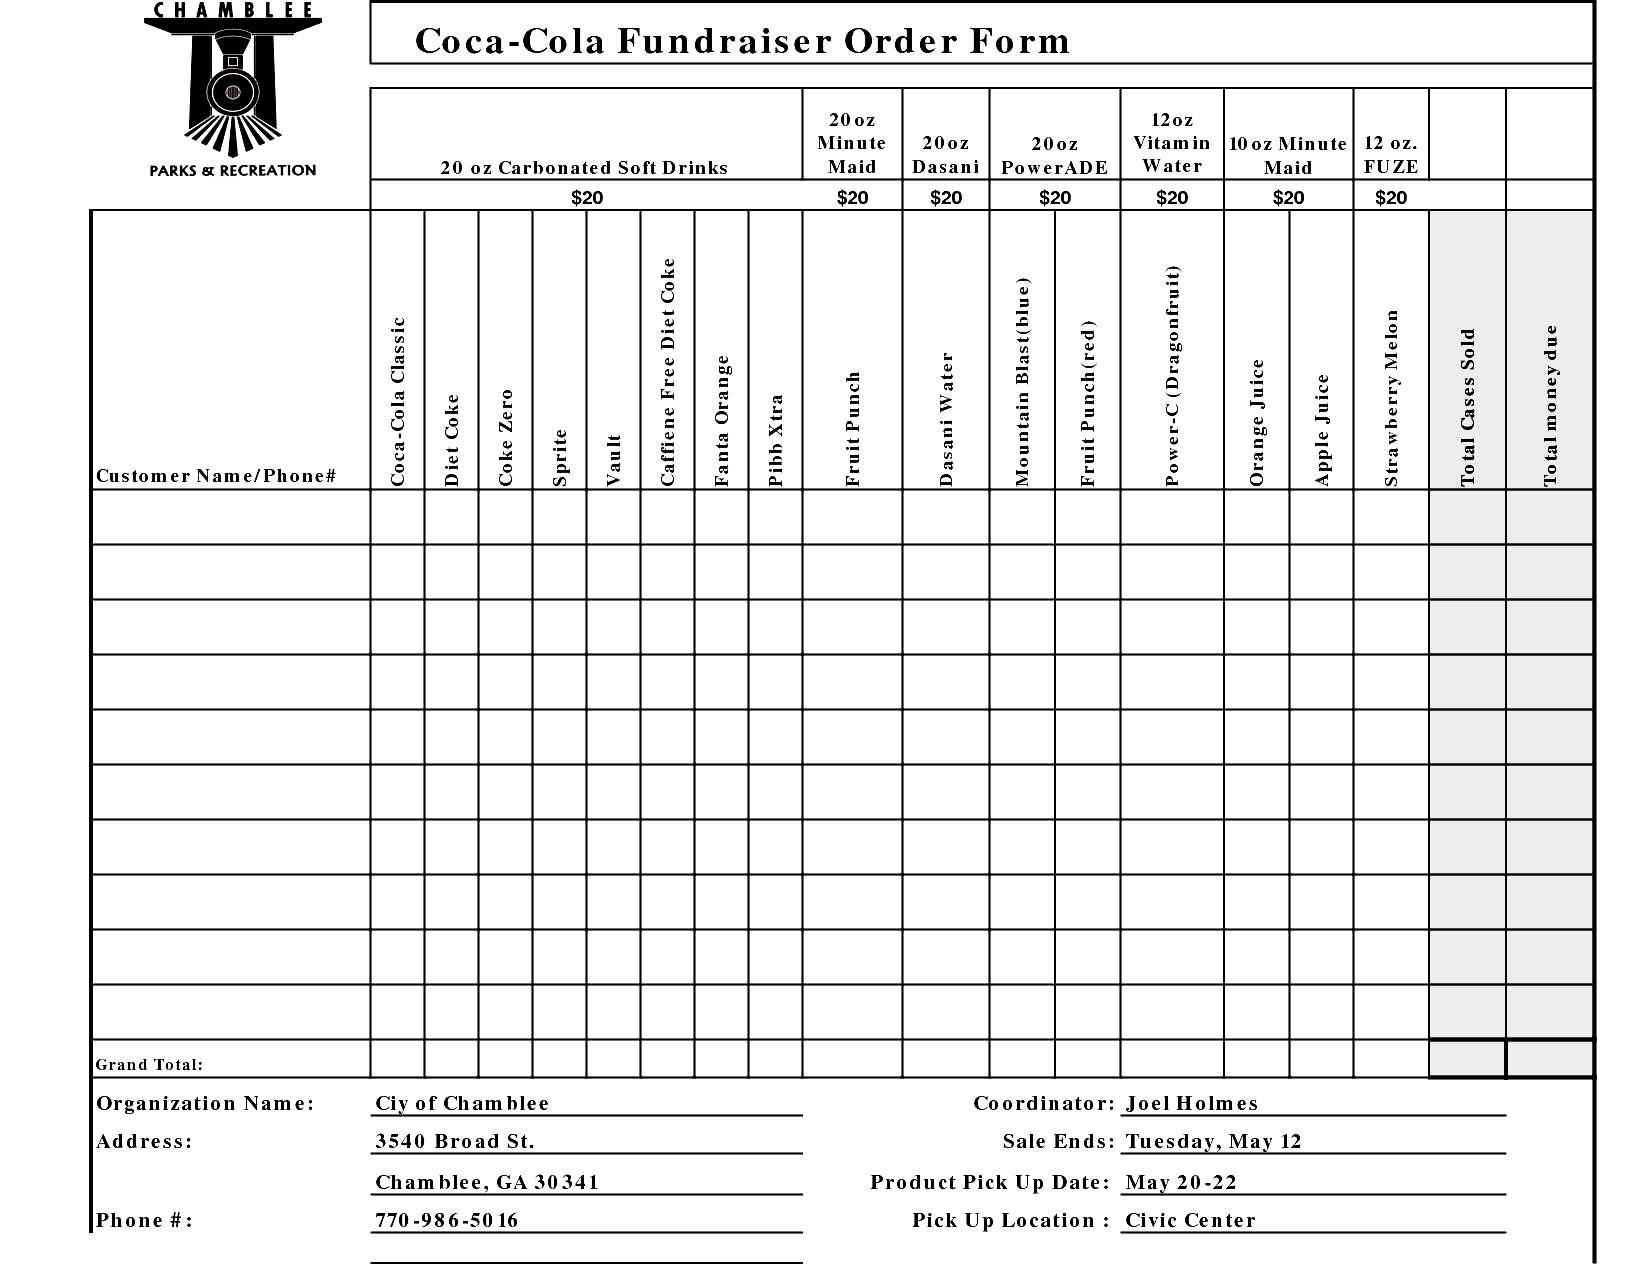 Free Fundraiser Order Form Template Excel | Besttemplates123 Regarding Blank Fundraiser Order Form Template